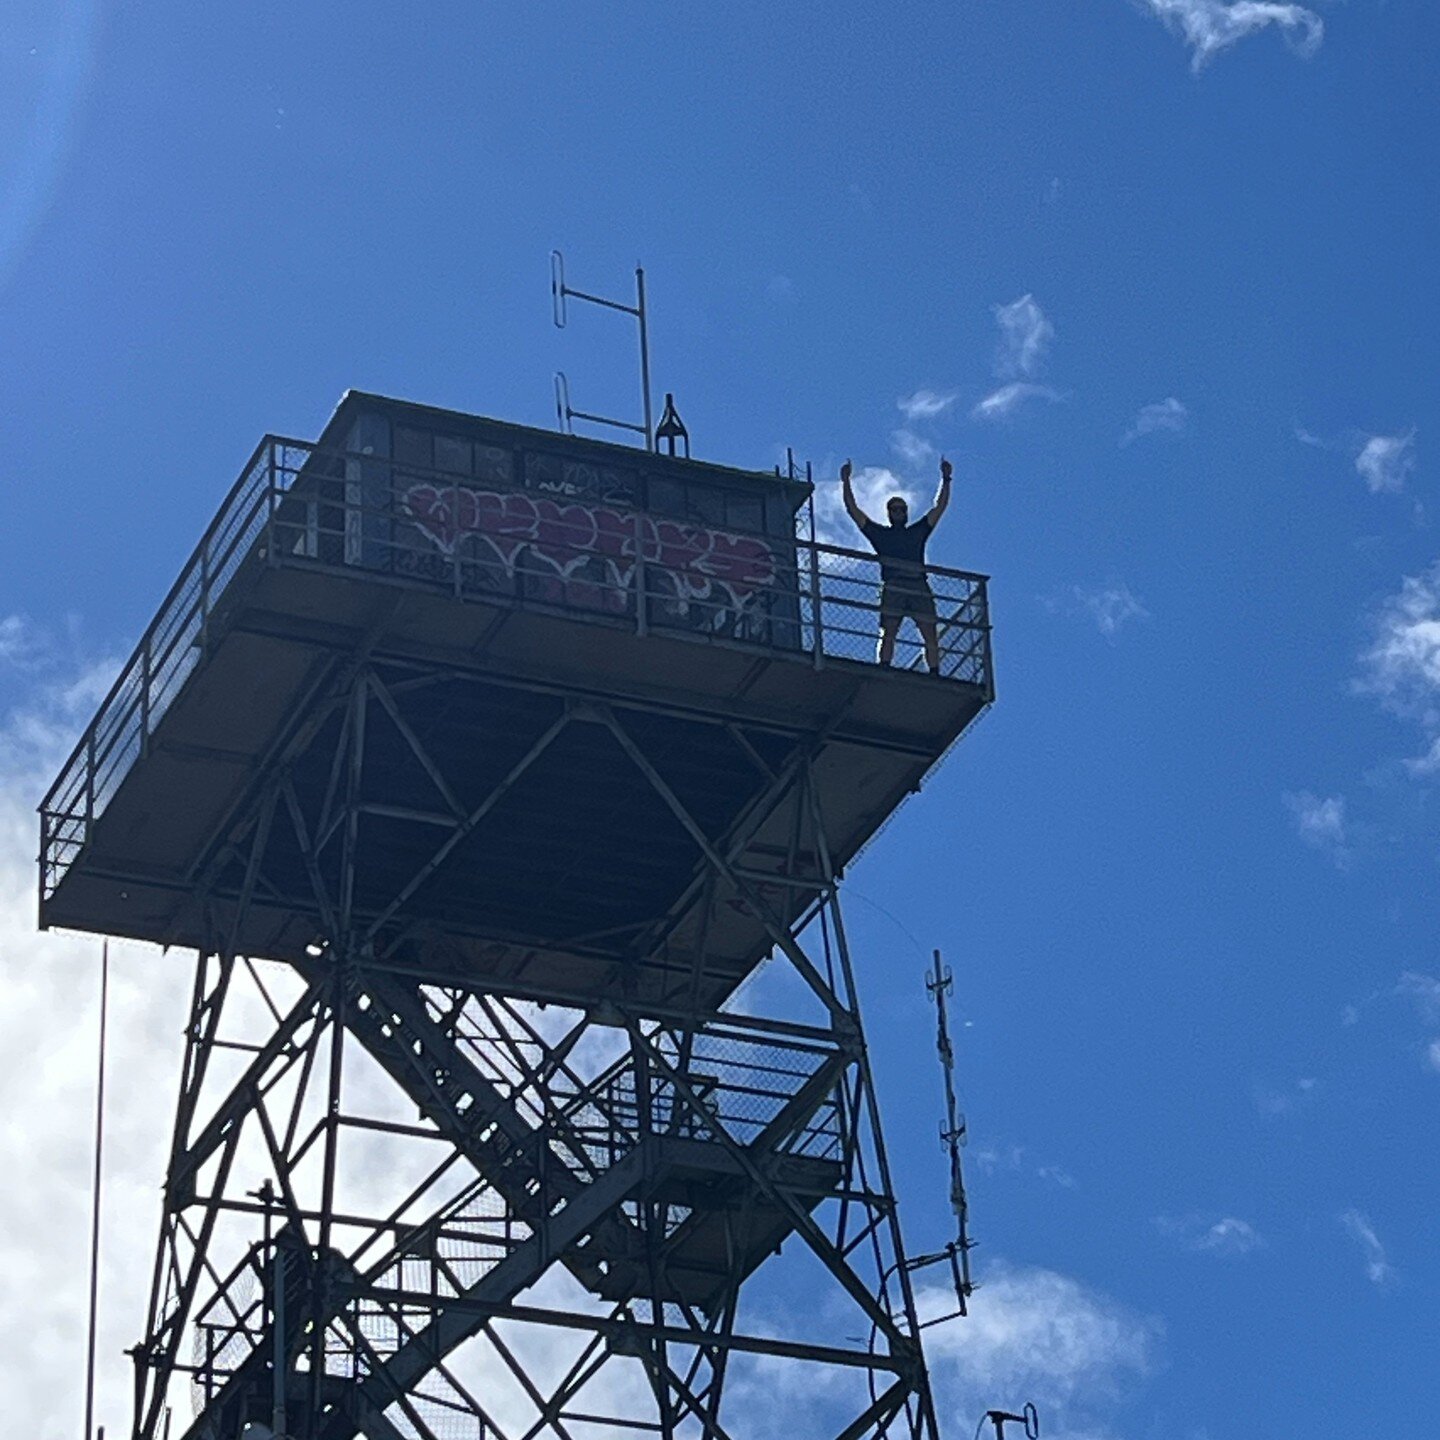 Fridays Hike to Lookout Tower off of the Parkway. There's no better way to catch an elevated view of the Blue Ridge Mountains than from one of the few remaining fire lookout towers near Asheville!